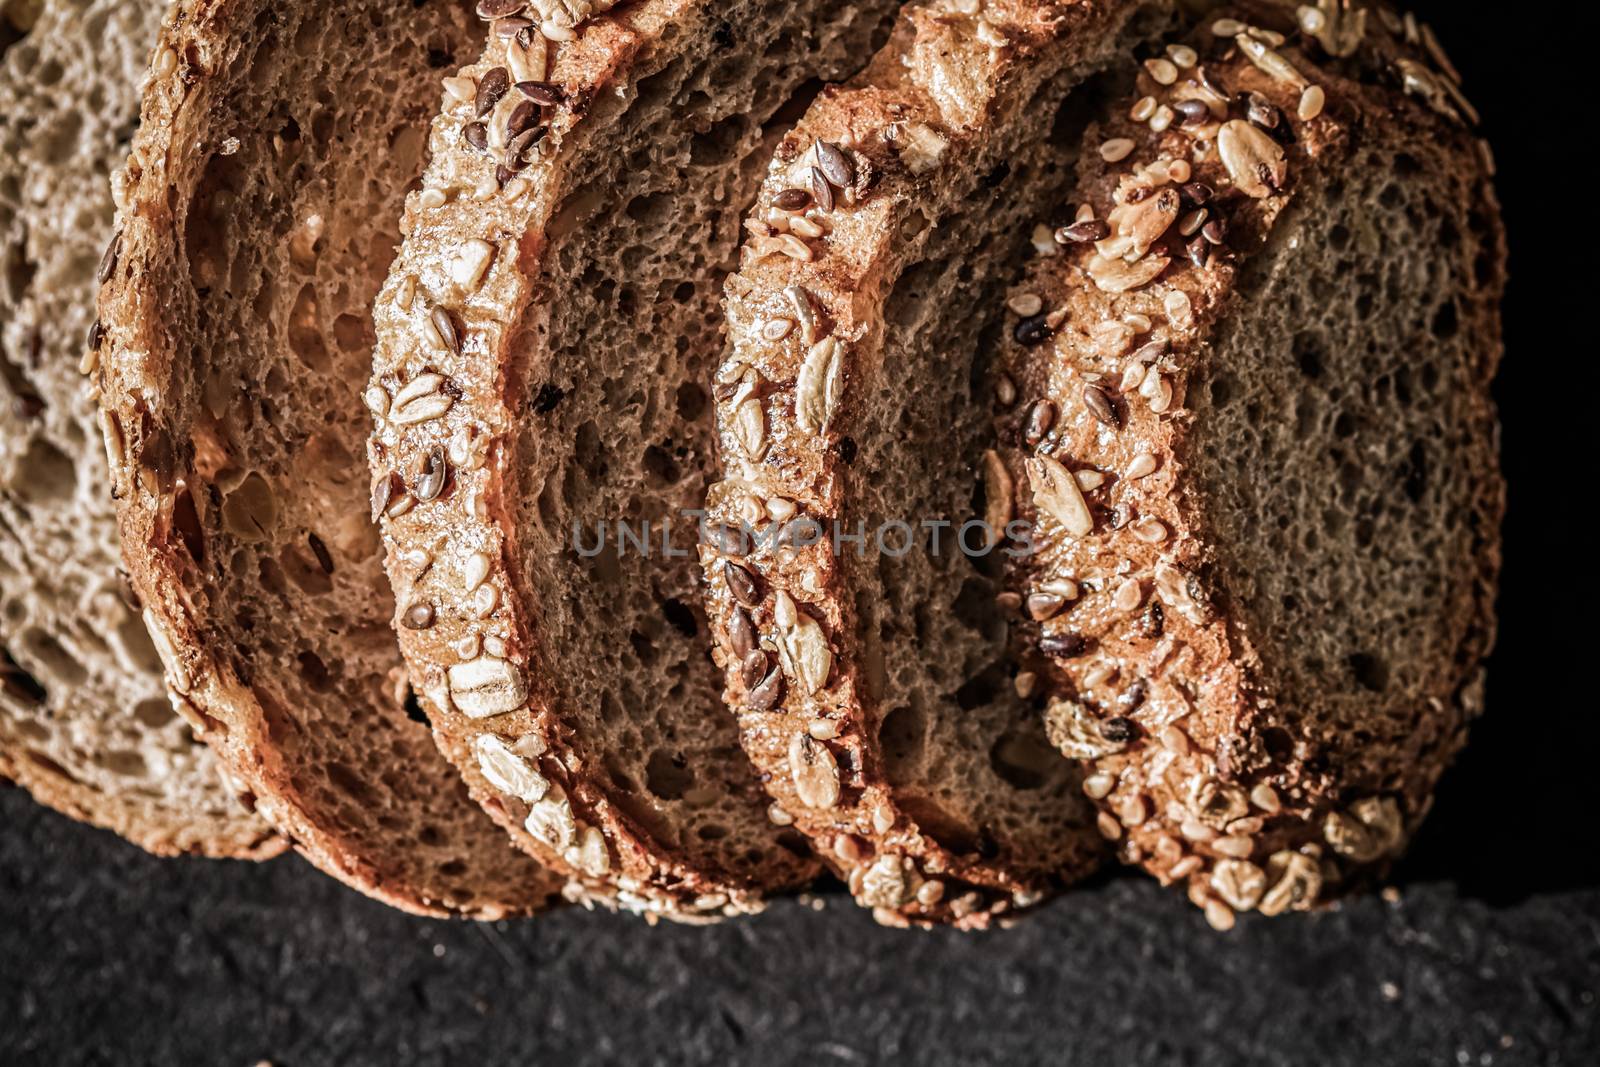 Fresh whole grain seeded bread, organic wheat flour, closeup slice texture as background for food blog or cook book recipes